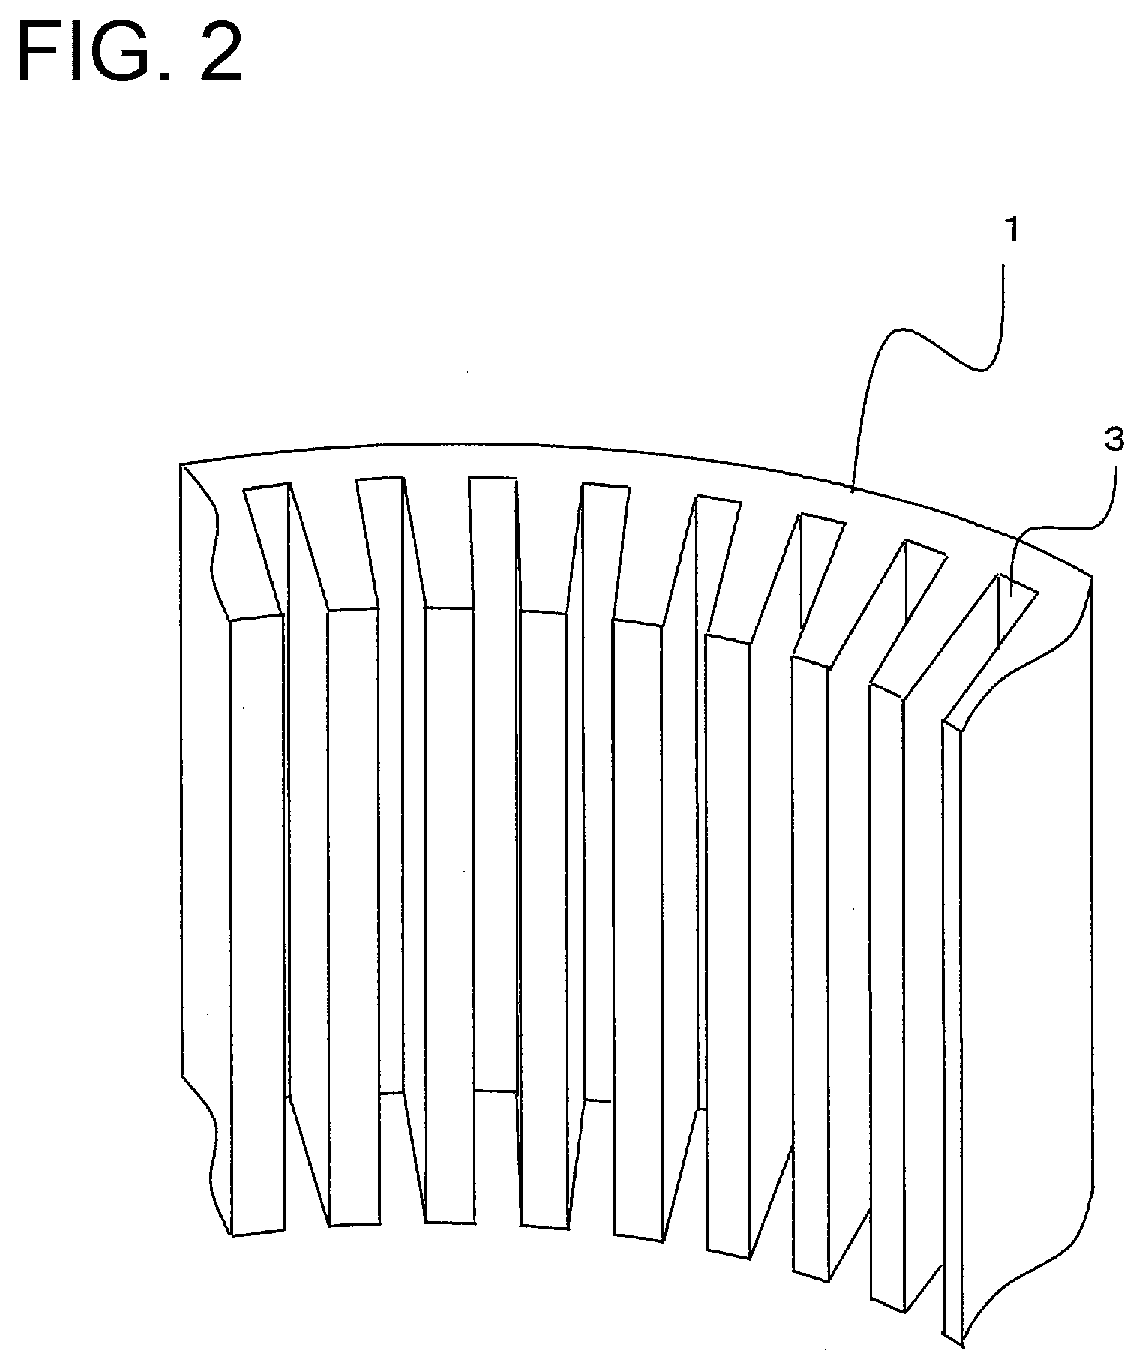 Assembled wire, segmented conductor, and segment coil and motor using the same